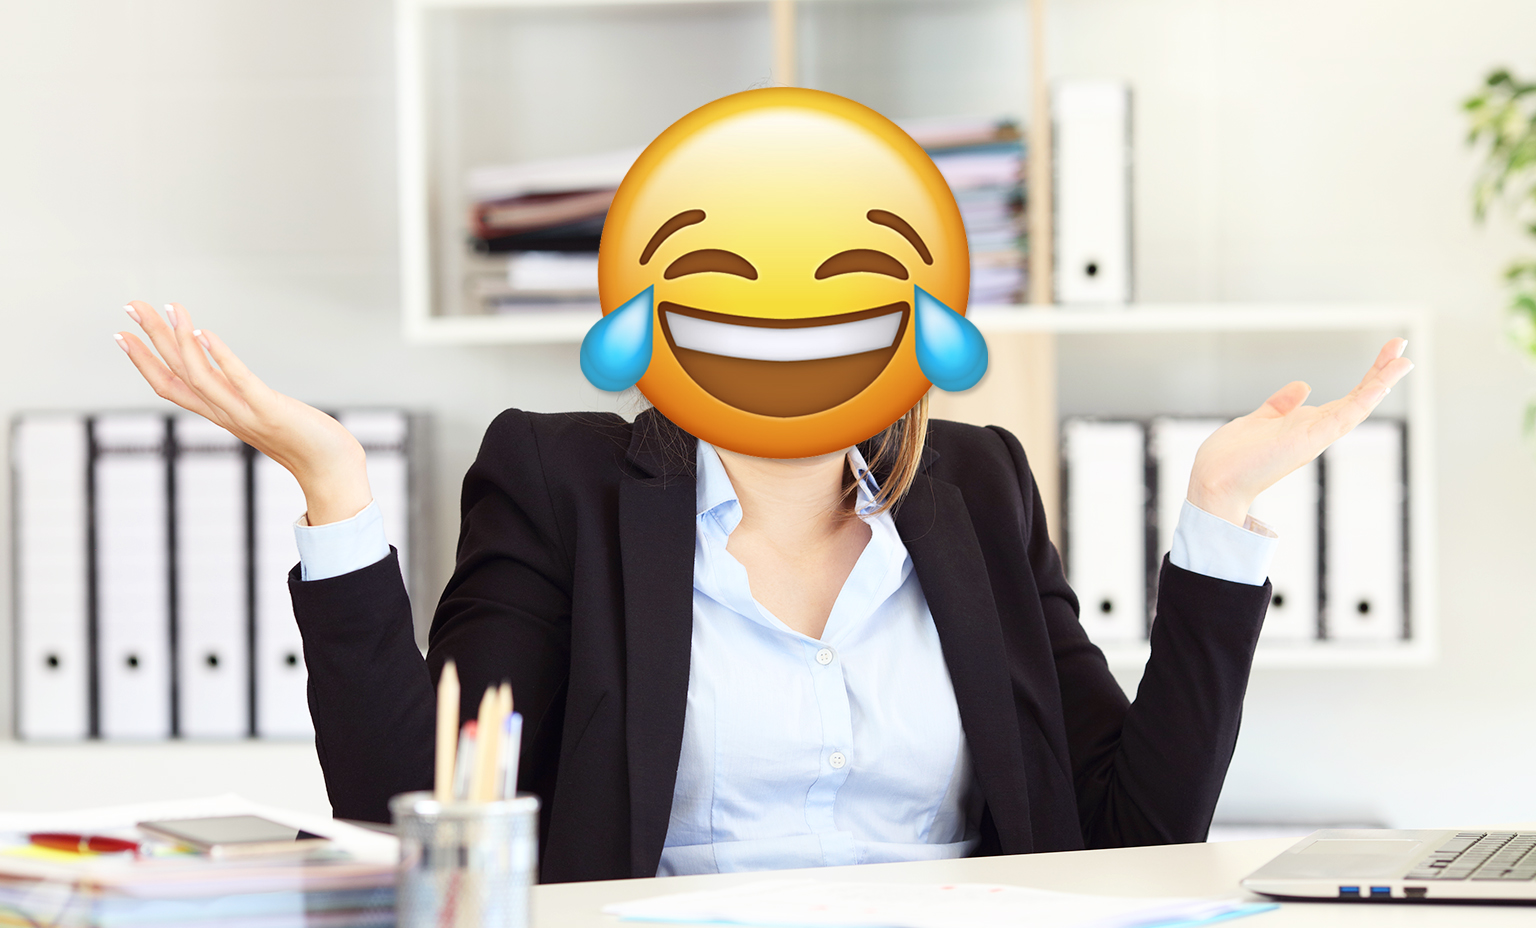 Worst Boss Ever Stories: 4 Millennial Tales of Horrible Bosses - All Kinds of Dodgy